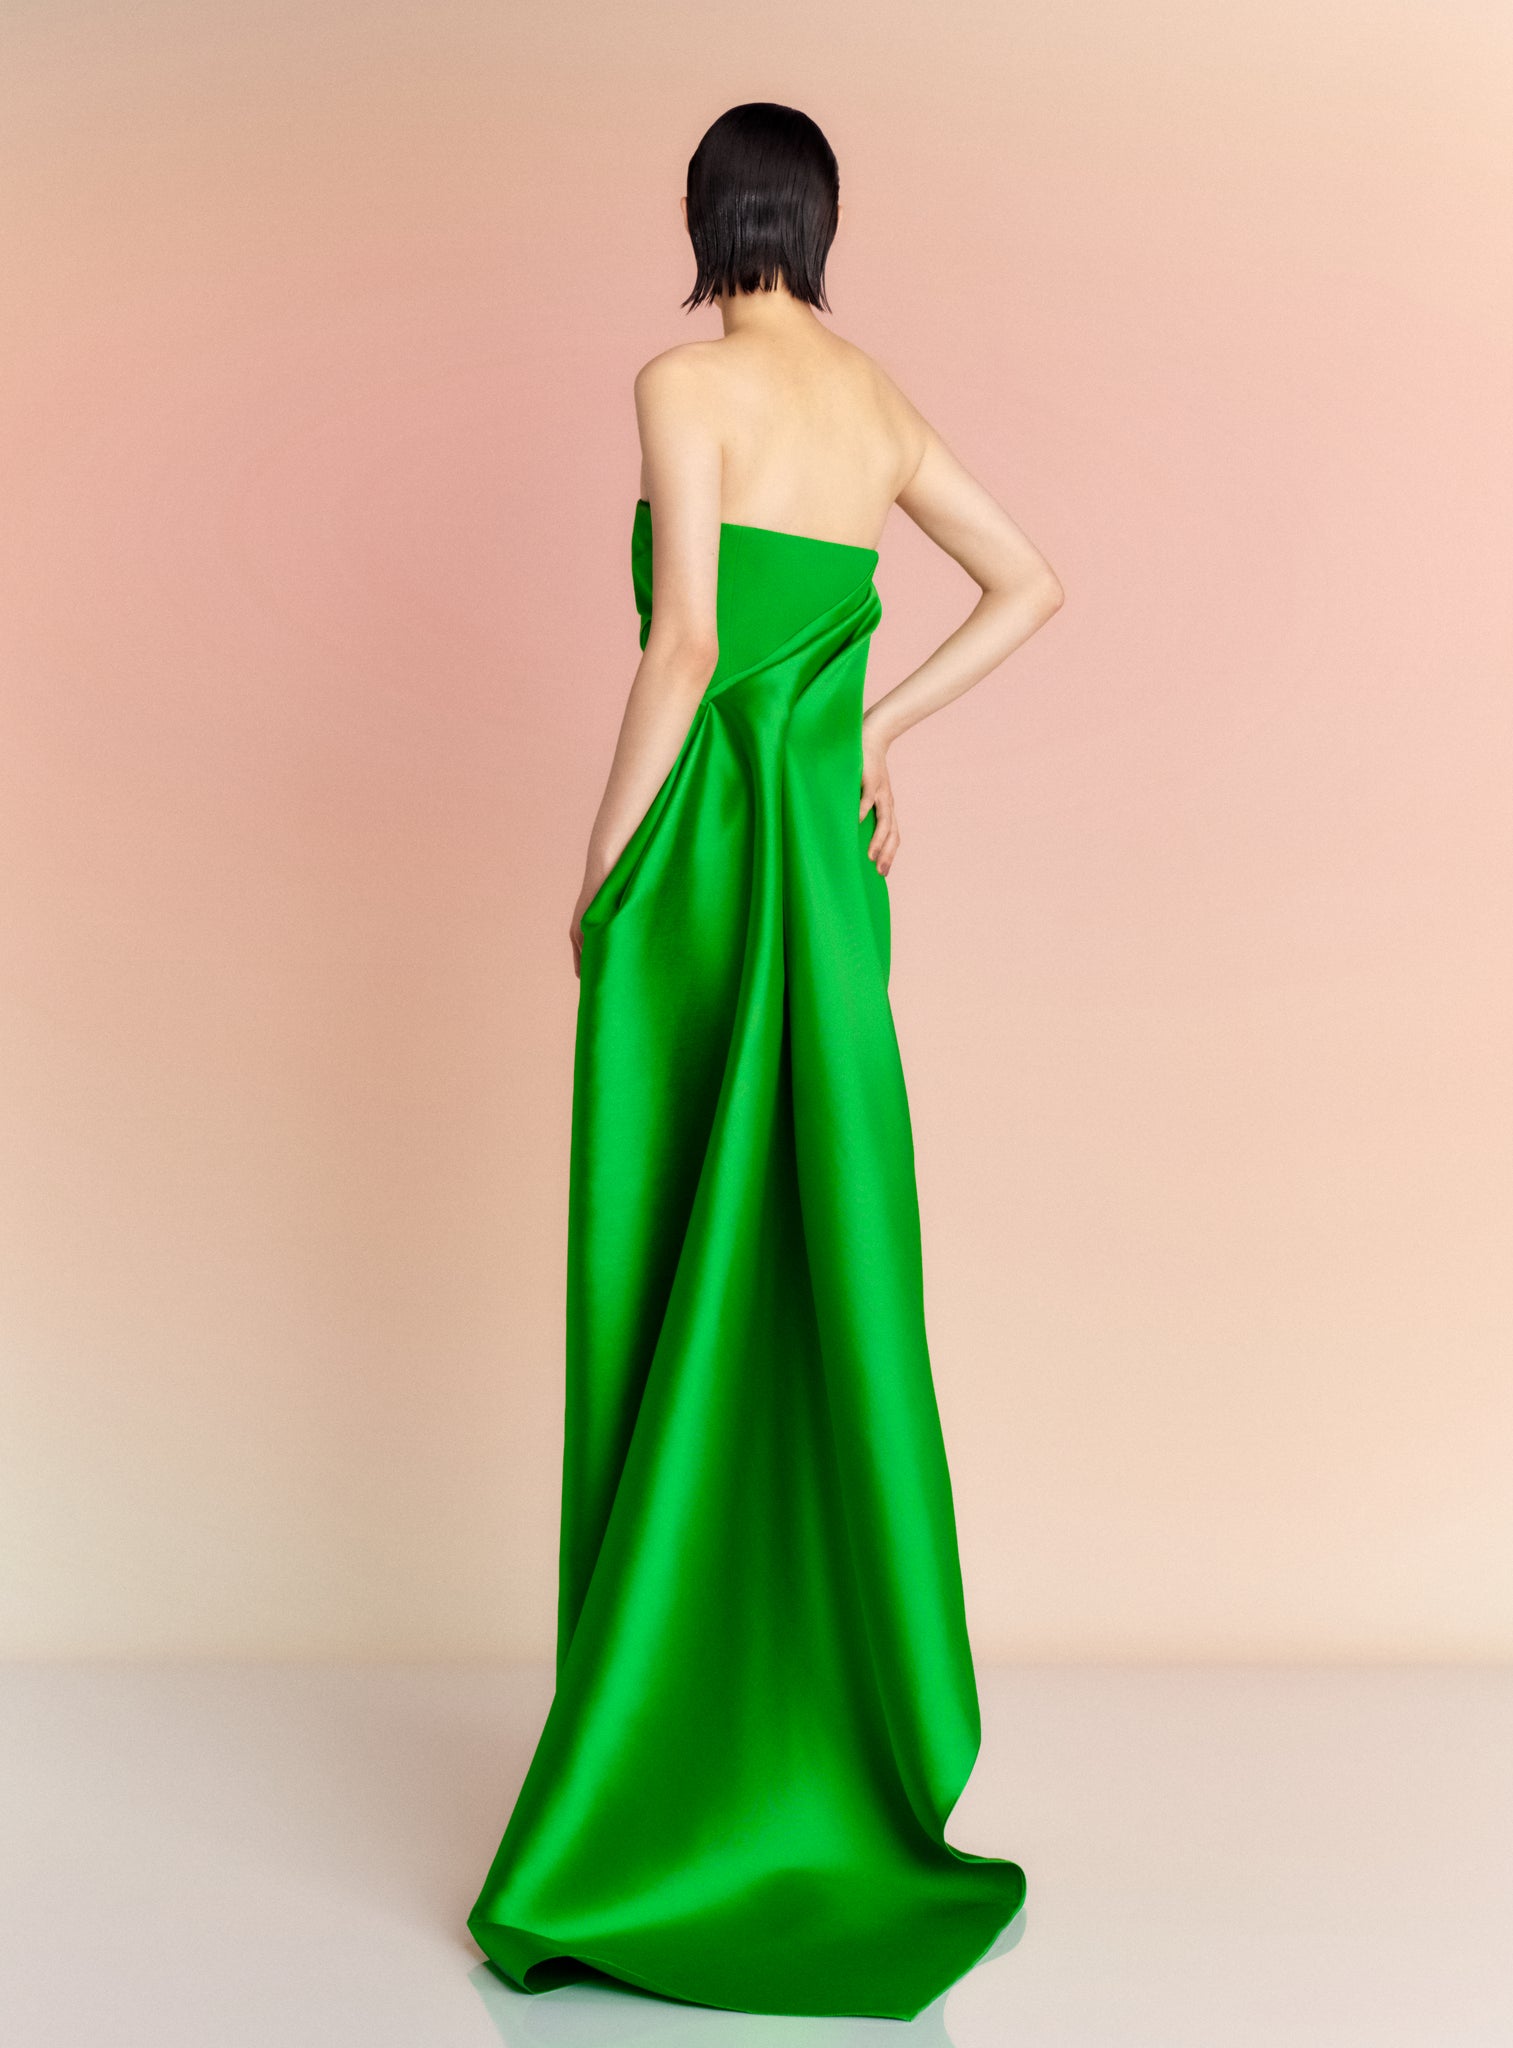 The Kinsley Maxi Dress in Bright Green